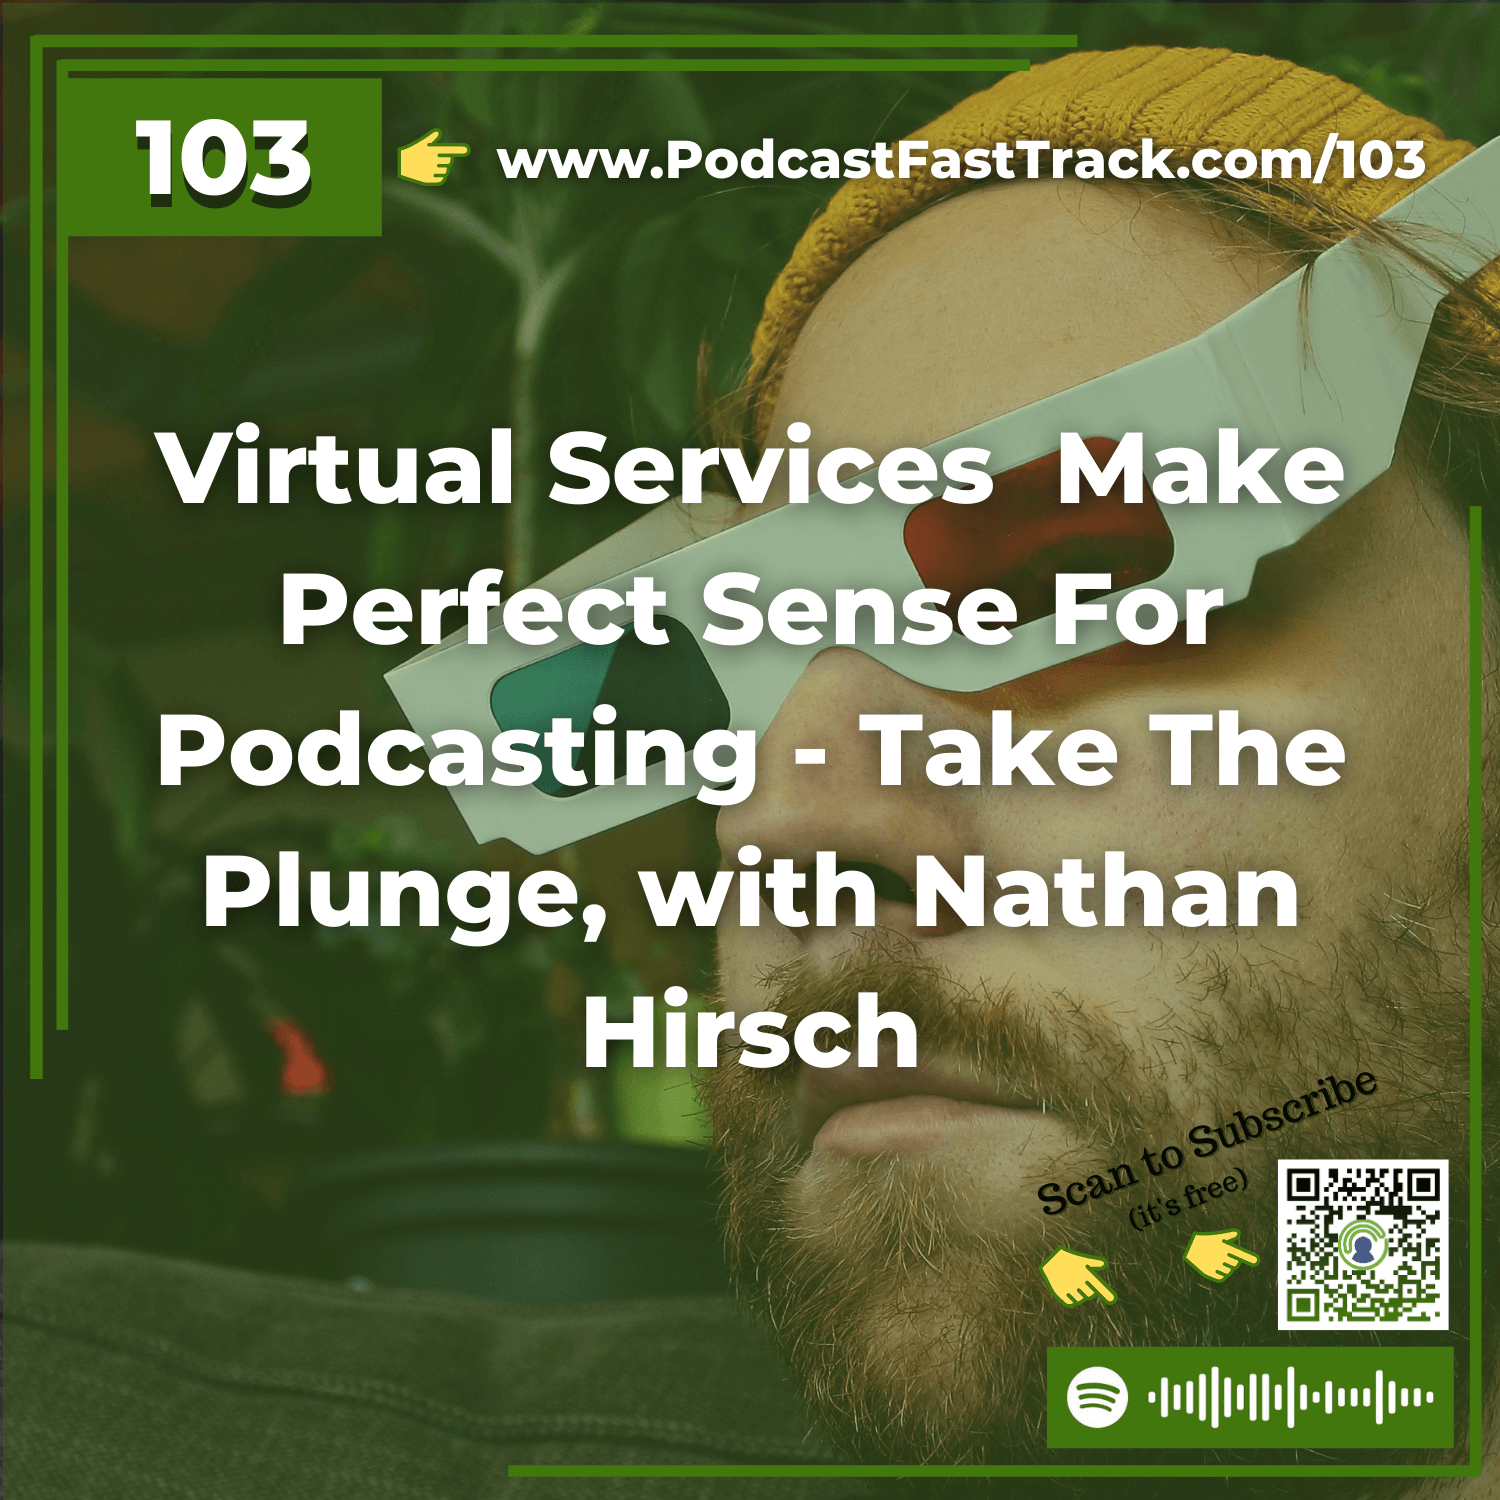 103: Virtual Services Make Perfect Sense For Podcasting - Take The Plunge, with Nathan Hirsch